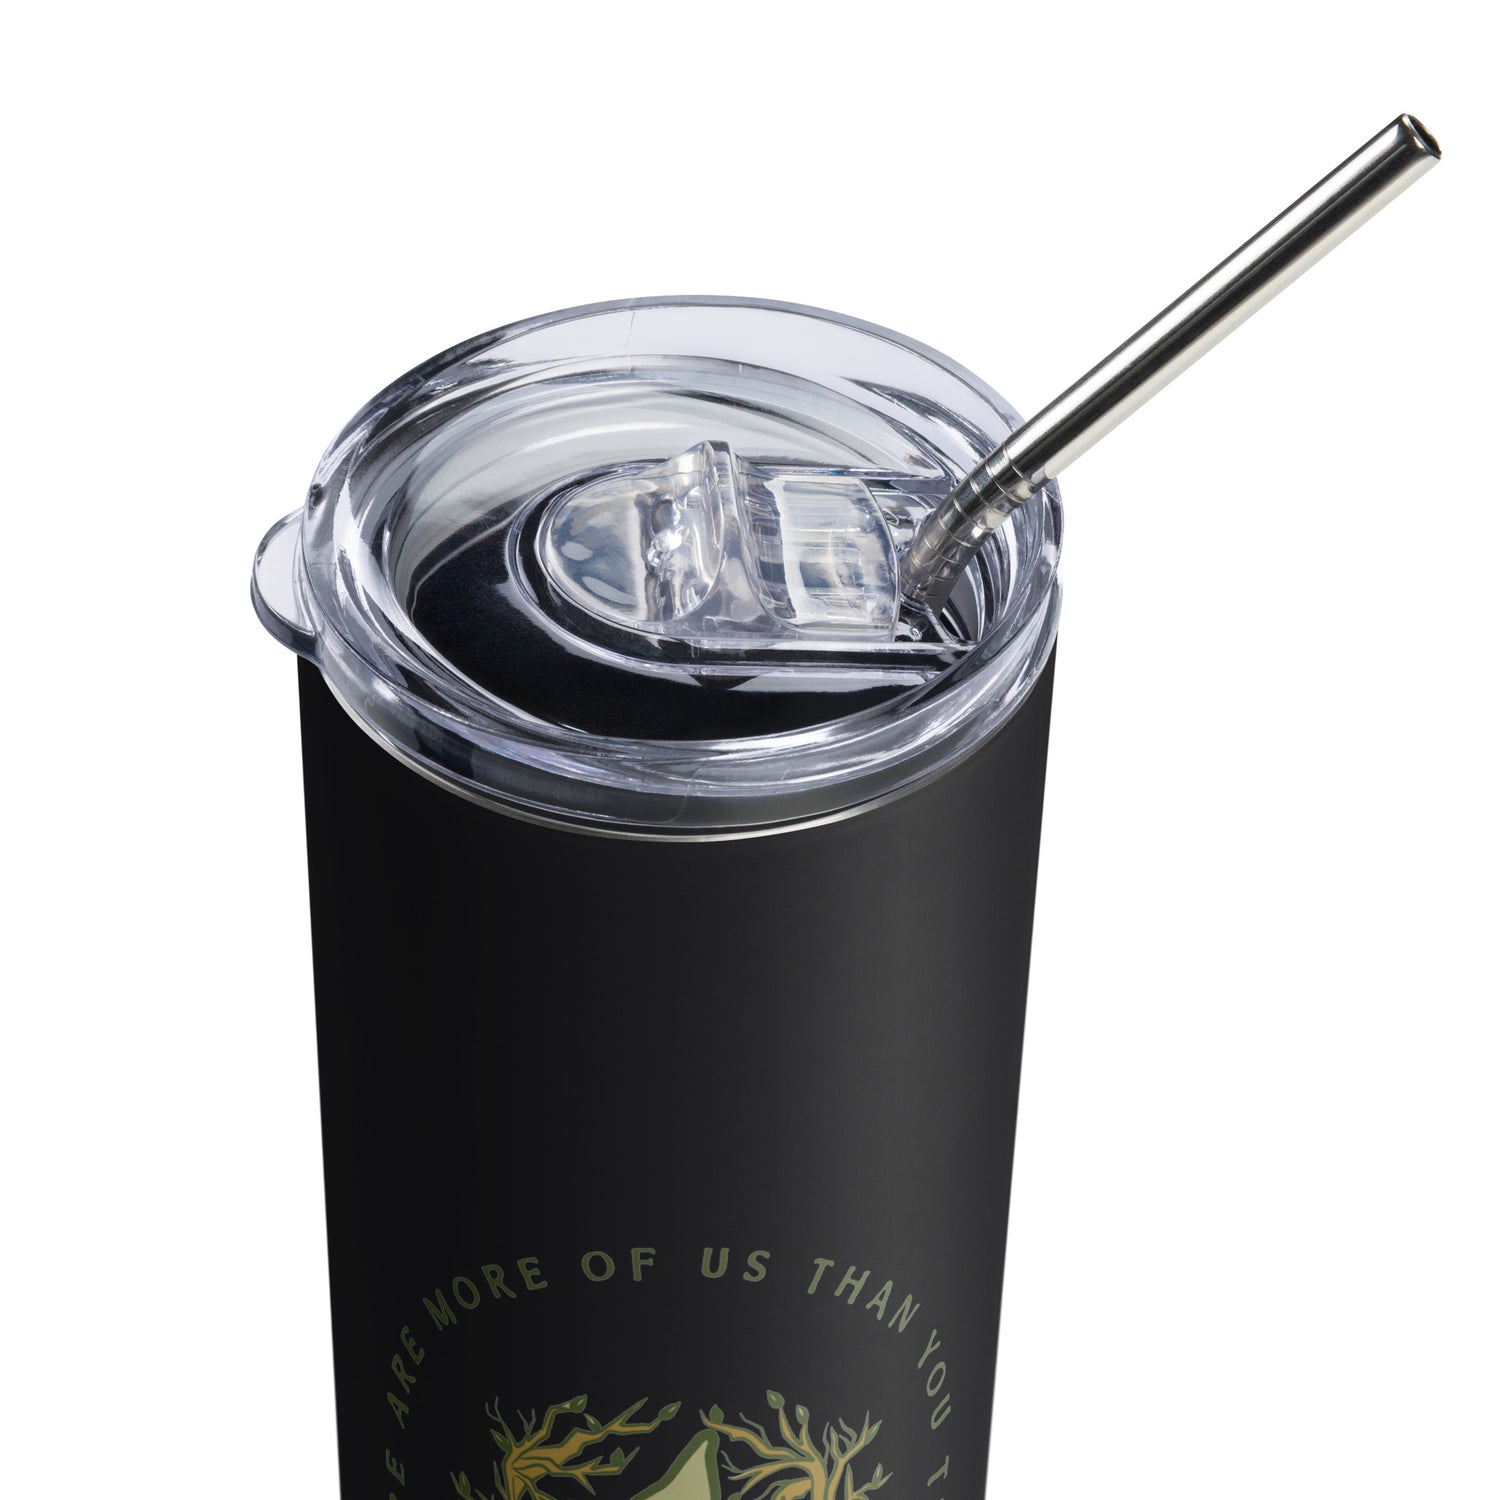 There are More of us then you Think Stainless steel tumbler - Witchy Kitchens